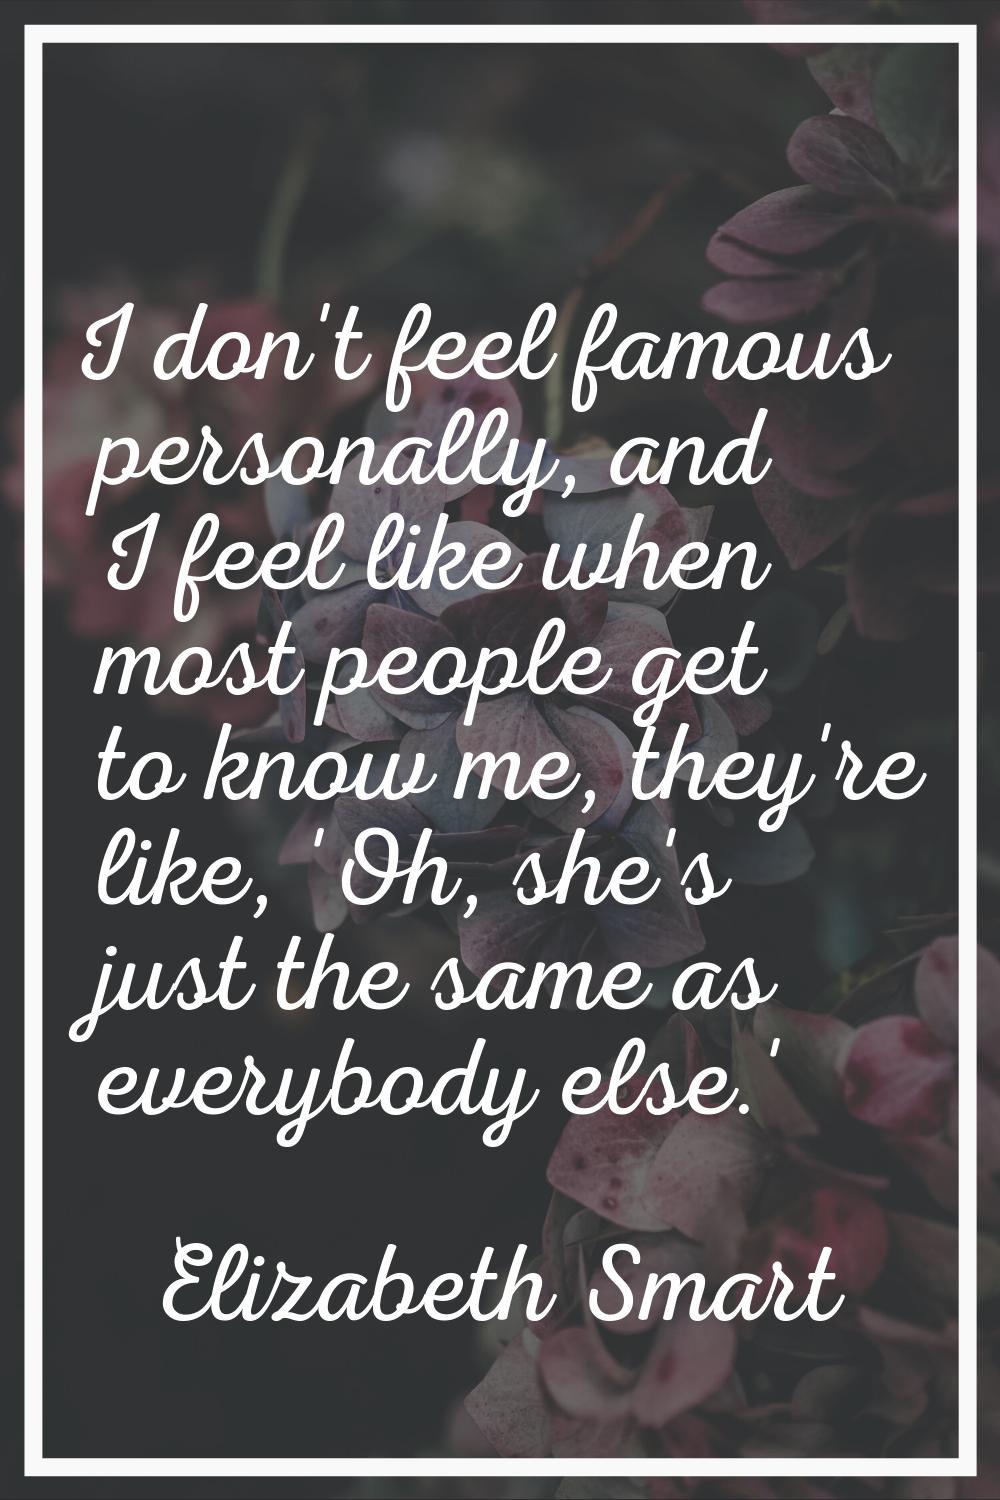 I don't feel famous personally, and I feel like when most people get to know me, they're like, 'Oh,